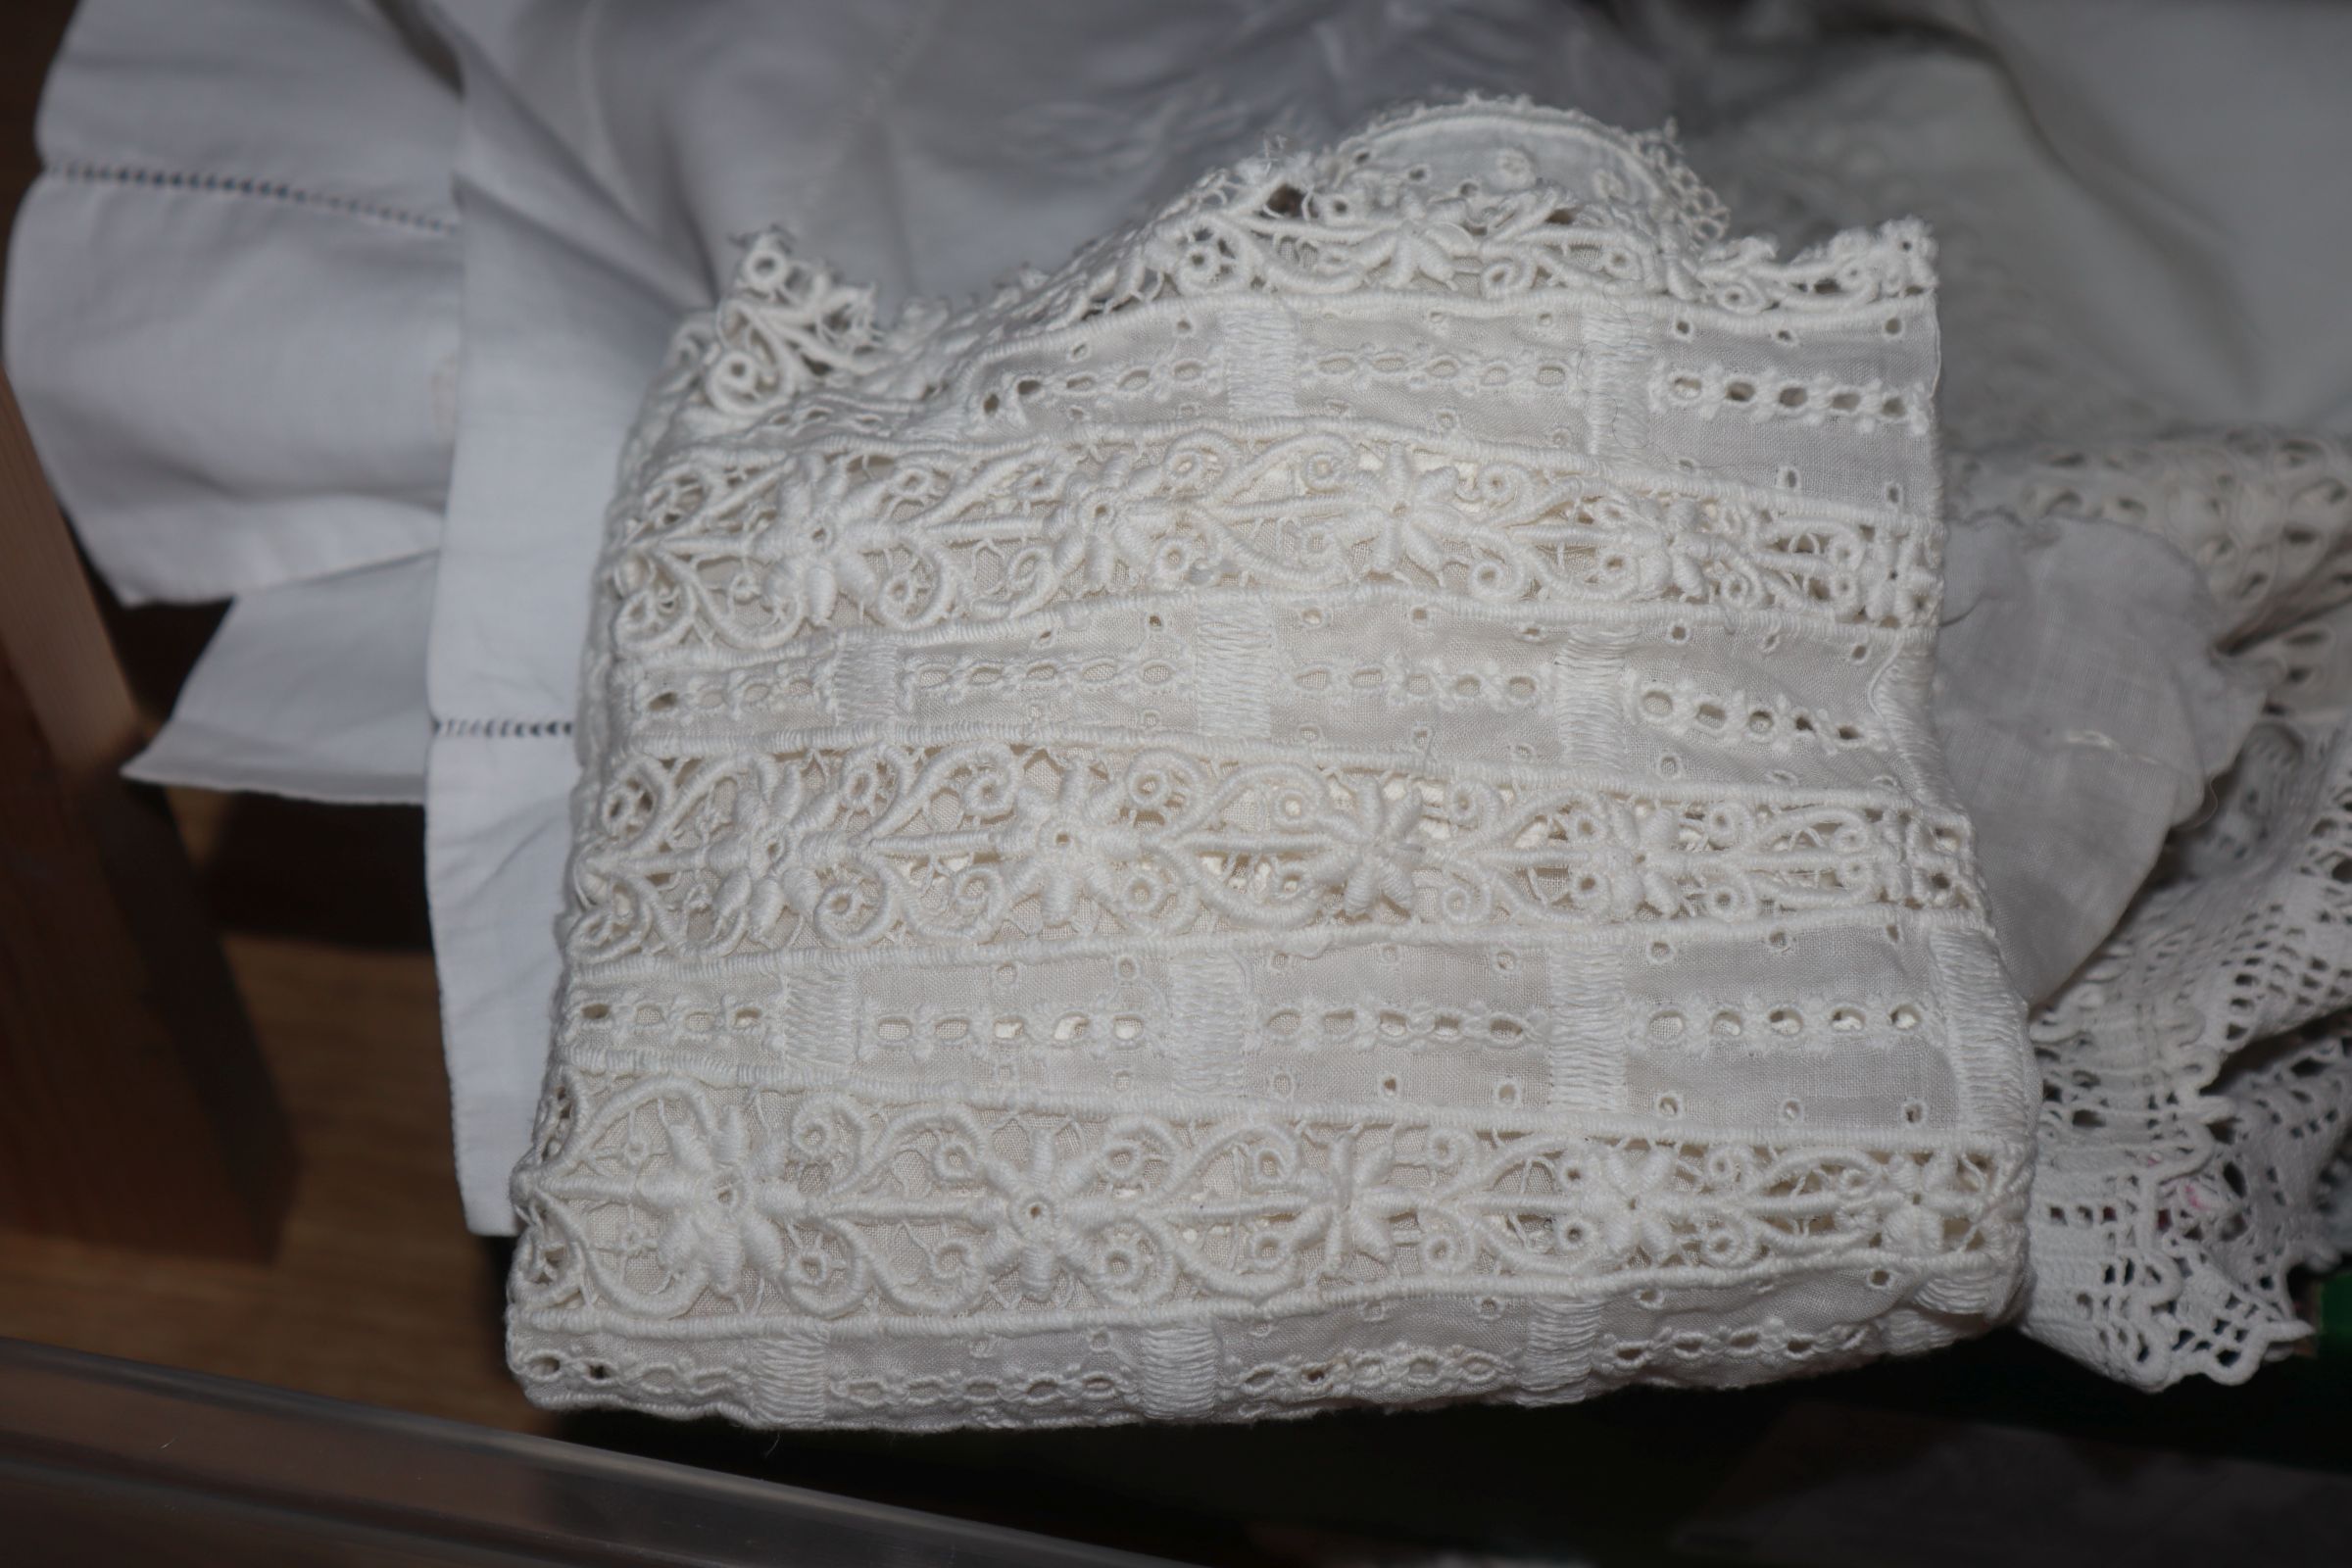 Various Brussels bobbin lace collars, a tape lace trim and mixed embroidered mats and linens - Image 2 of 7